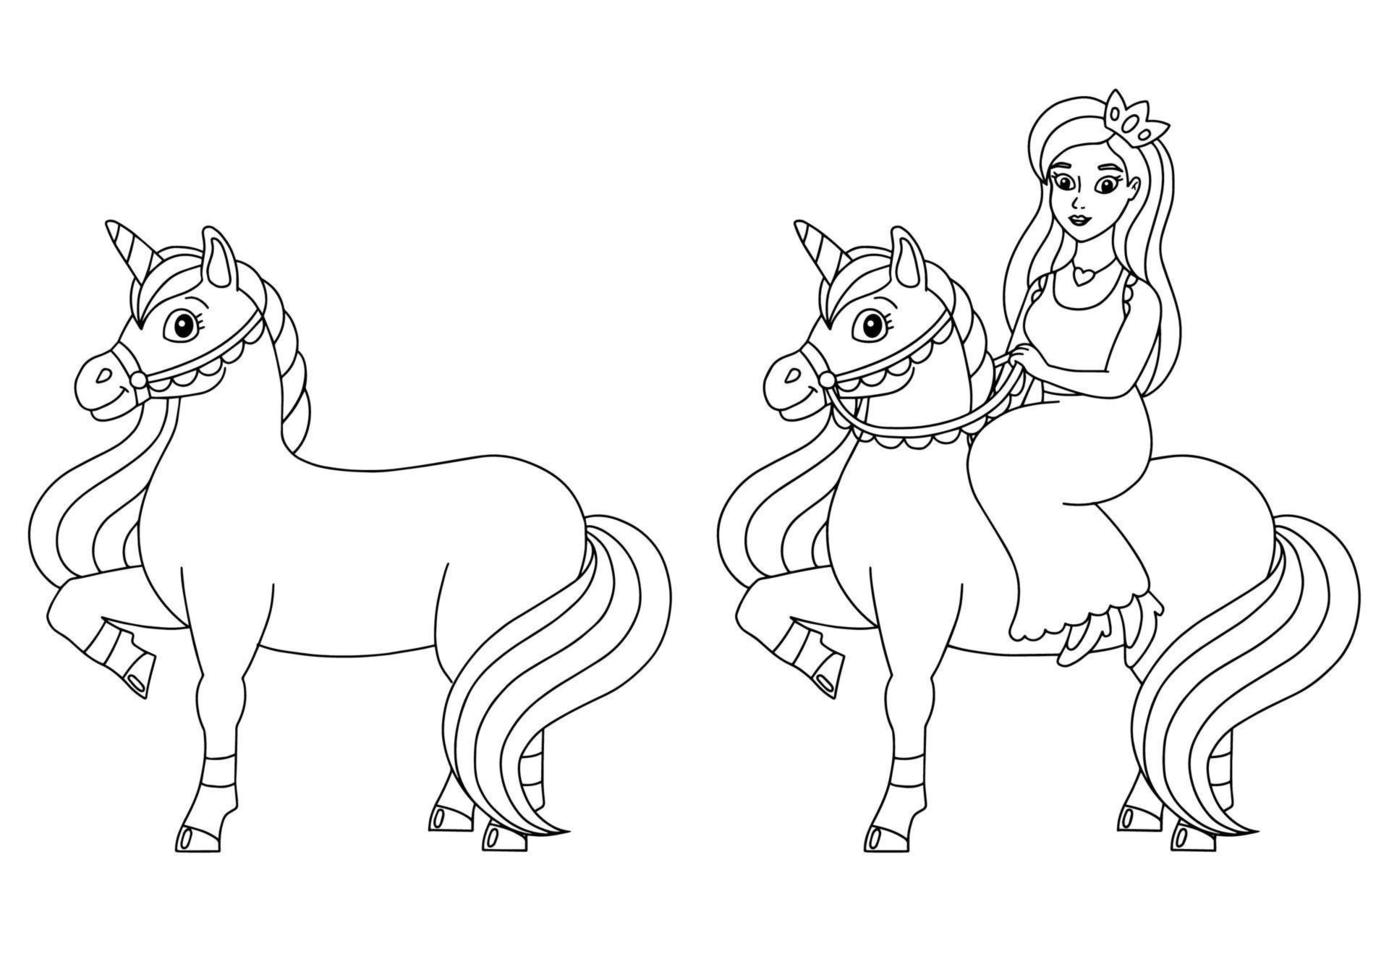 The princess is riding a unicorn. Coloring book page for kids. Cartoon style character. Vector illustration isolated on white background.